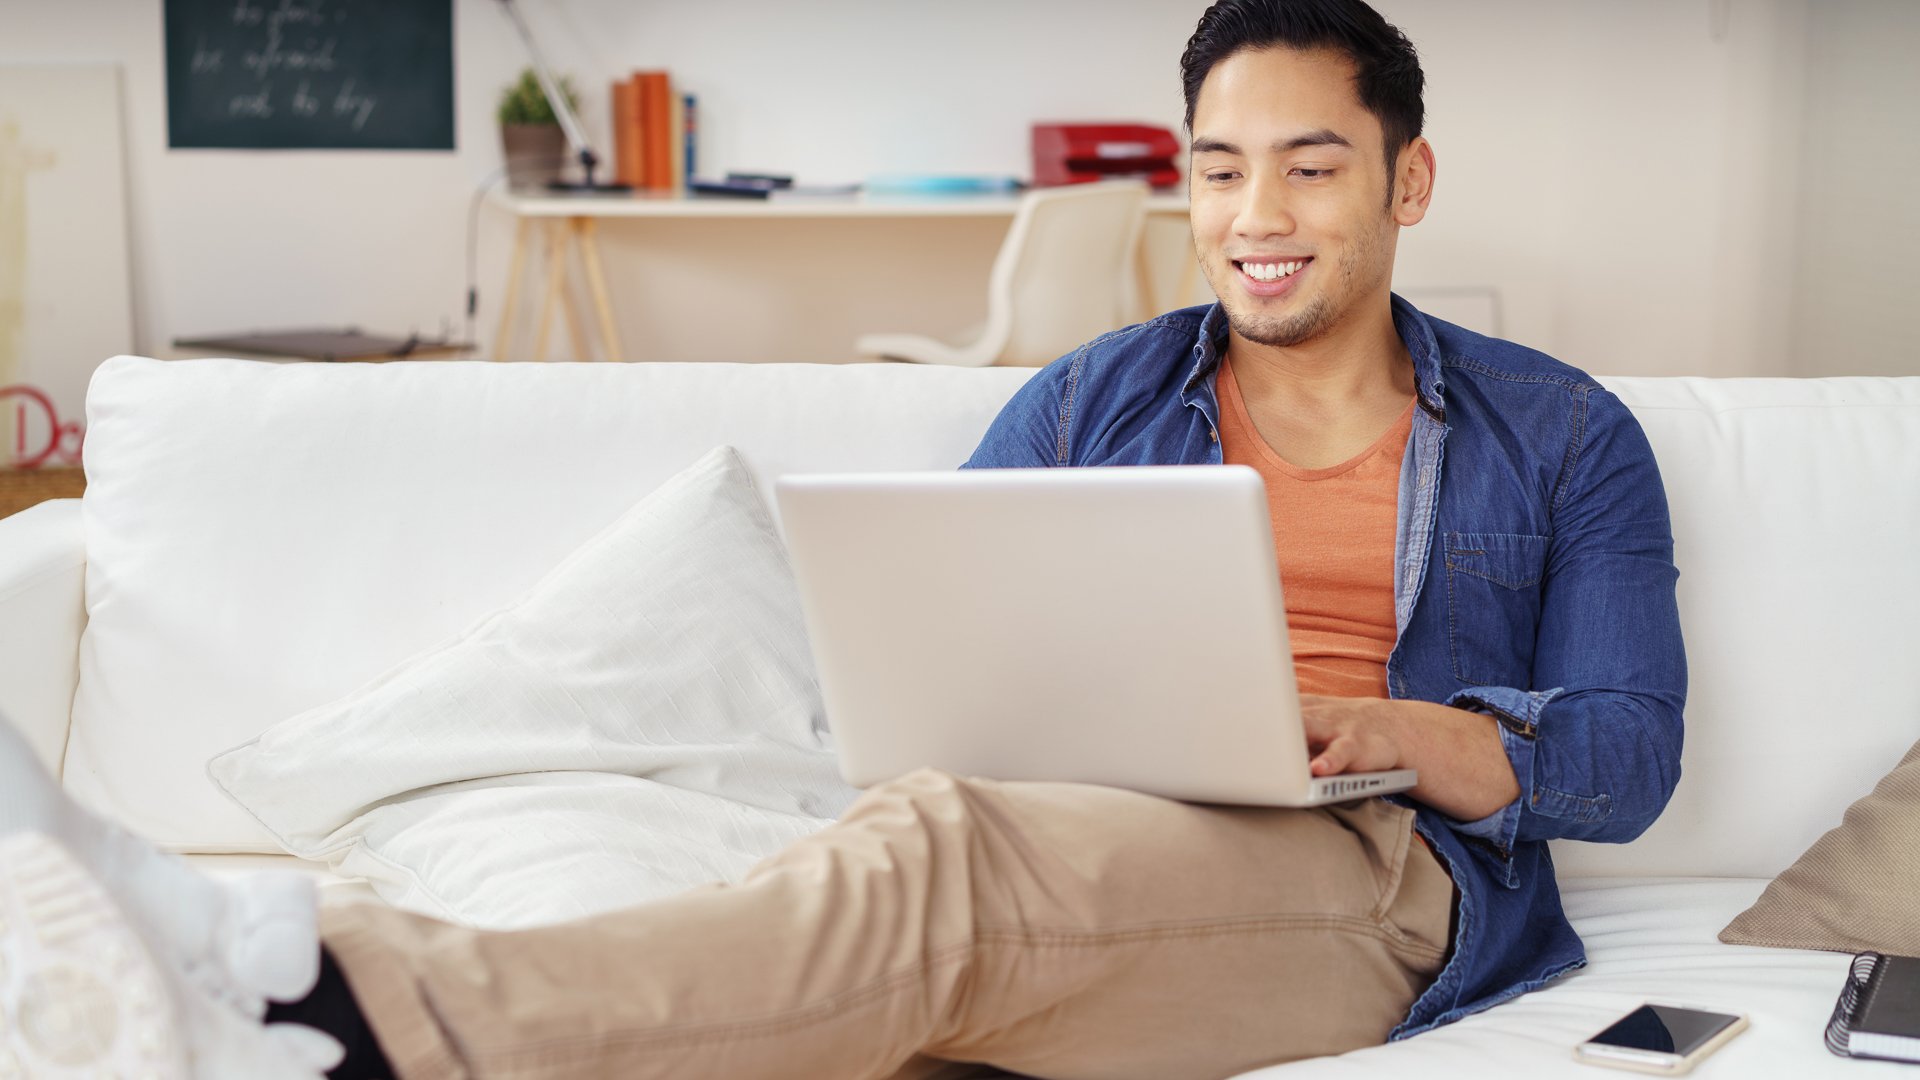 Remote Work: Top 25 Side Gigs To Pursue From Home and How Much They Pay